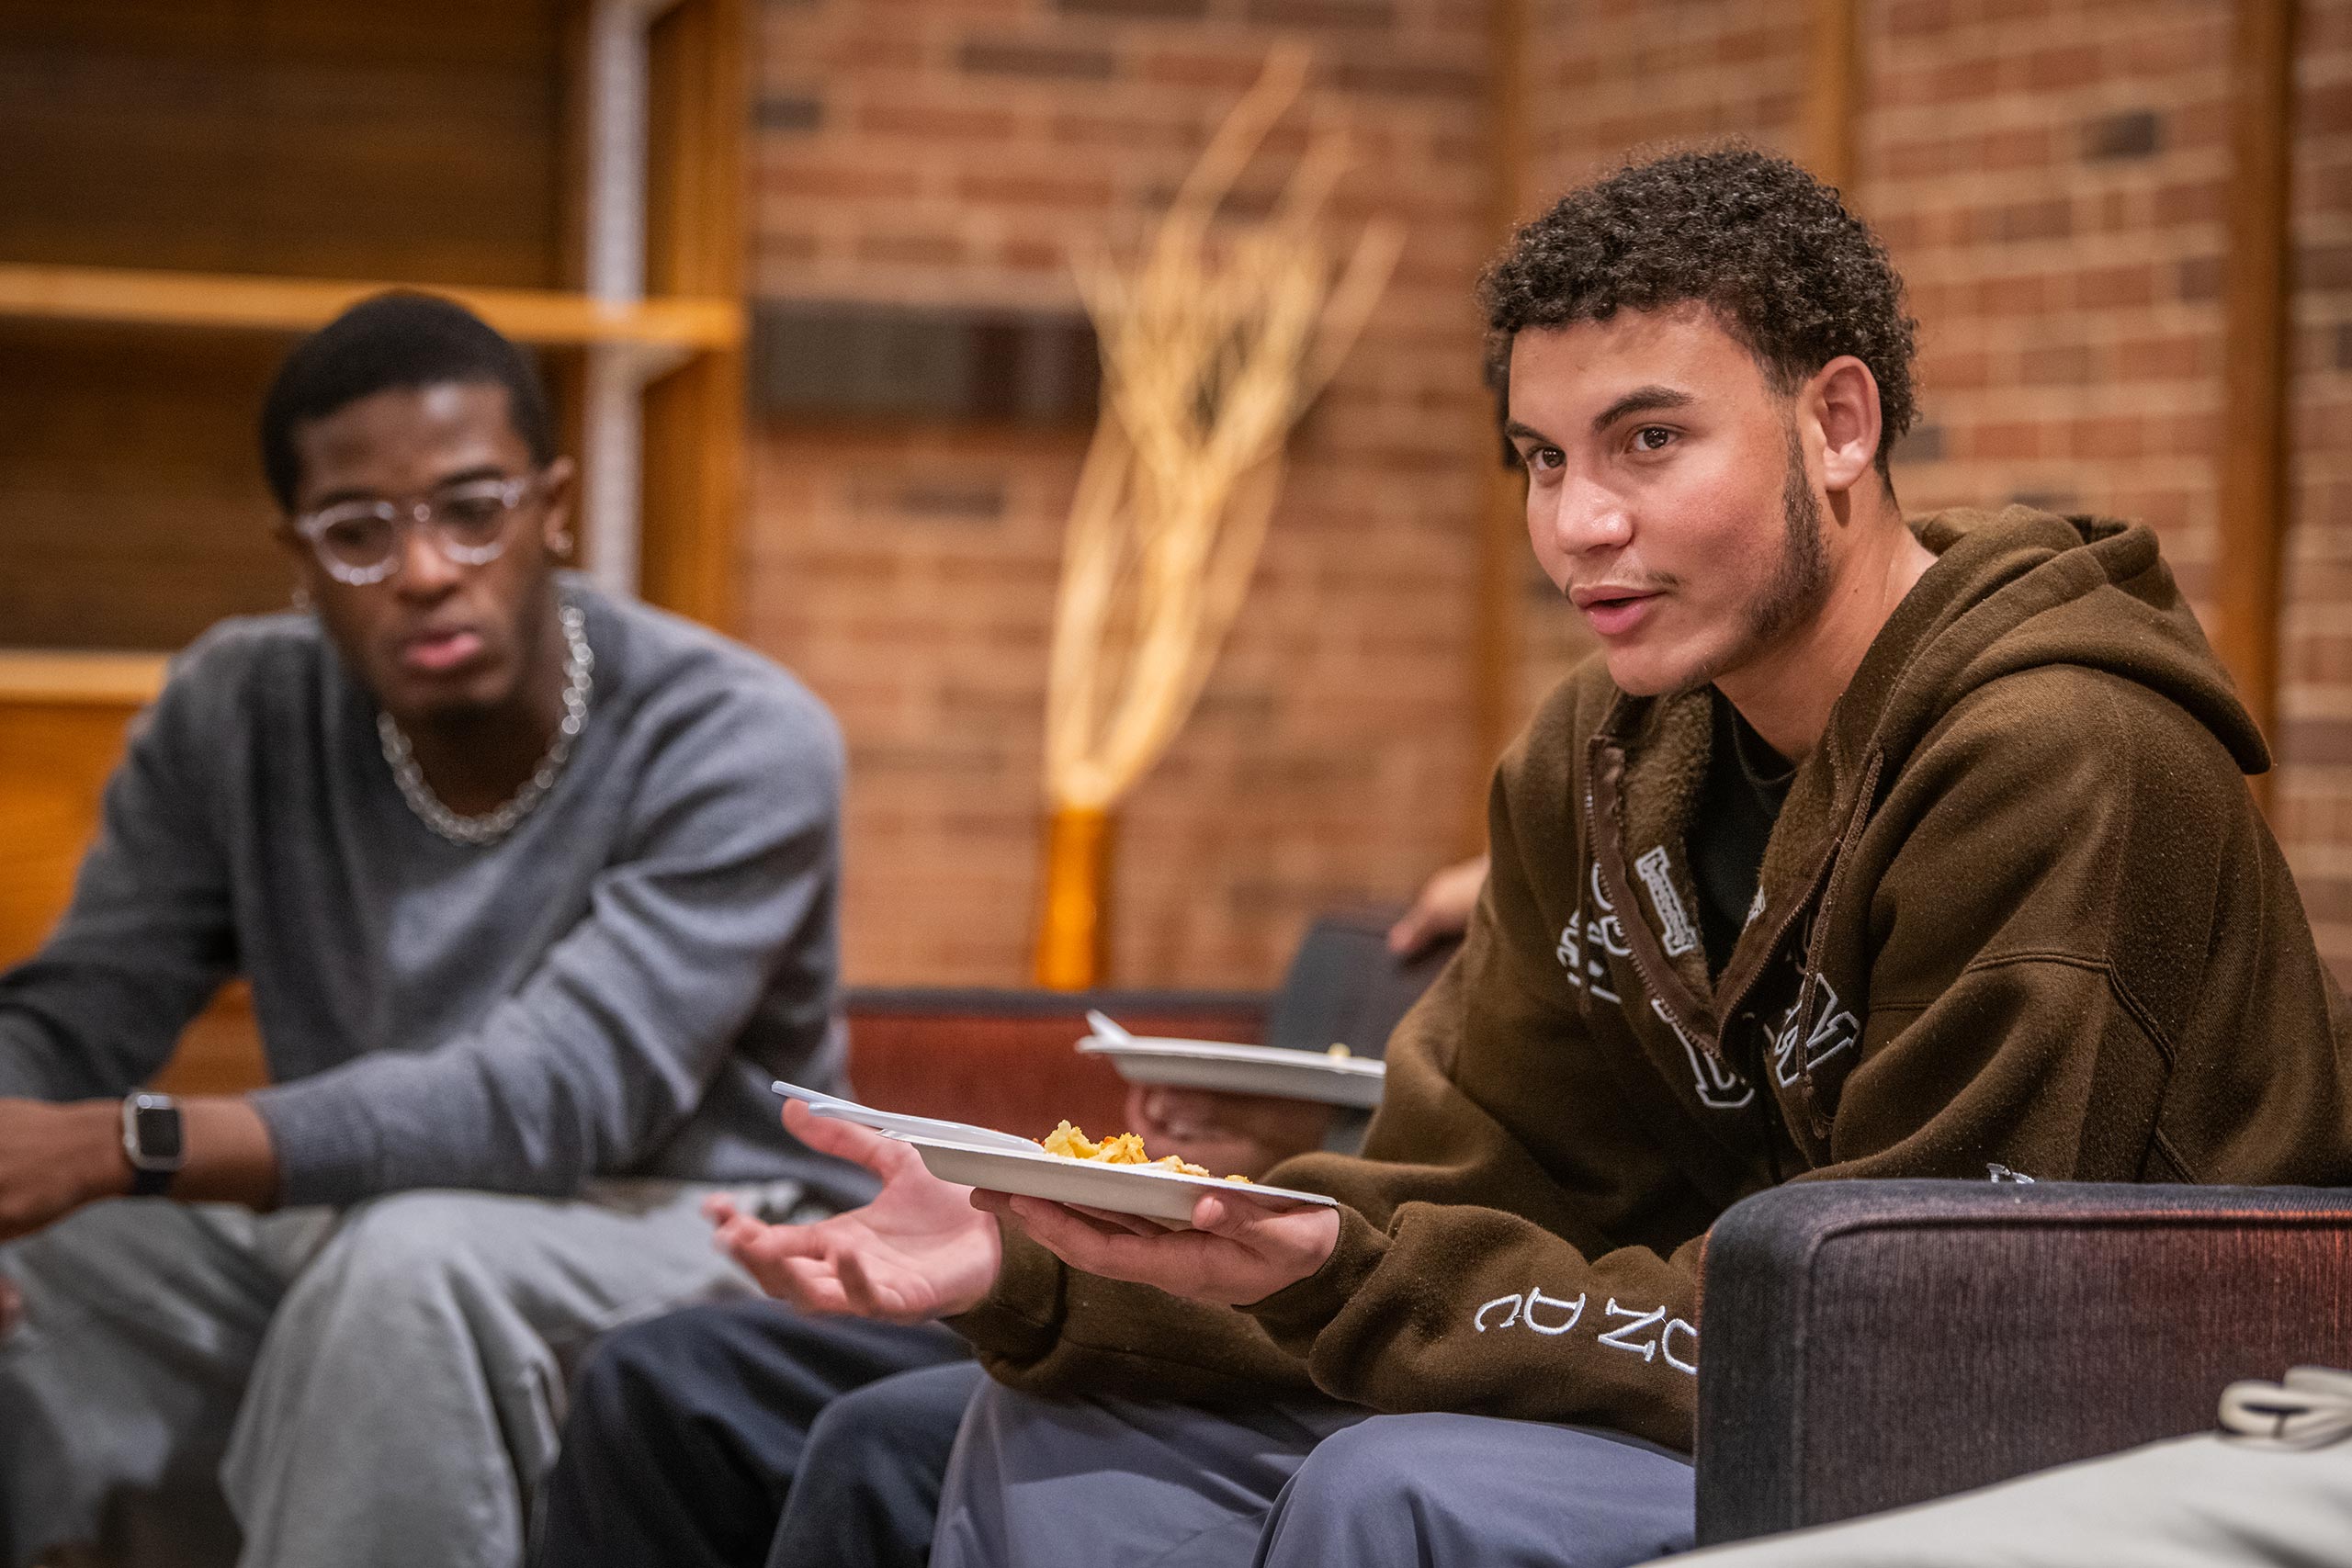 Students eat and converse at an event held by the Men of Color Alliance at Clark University